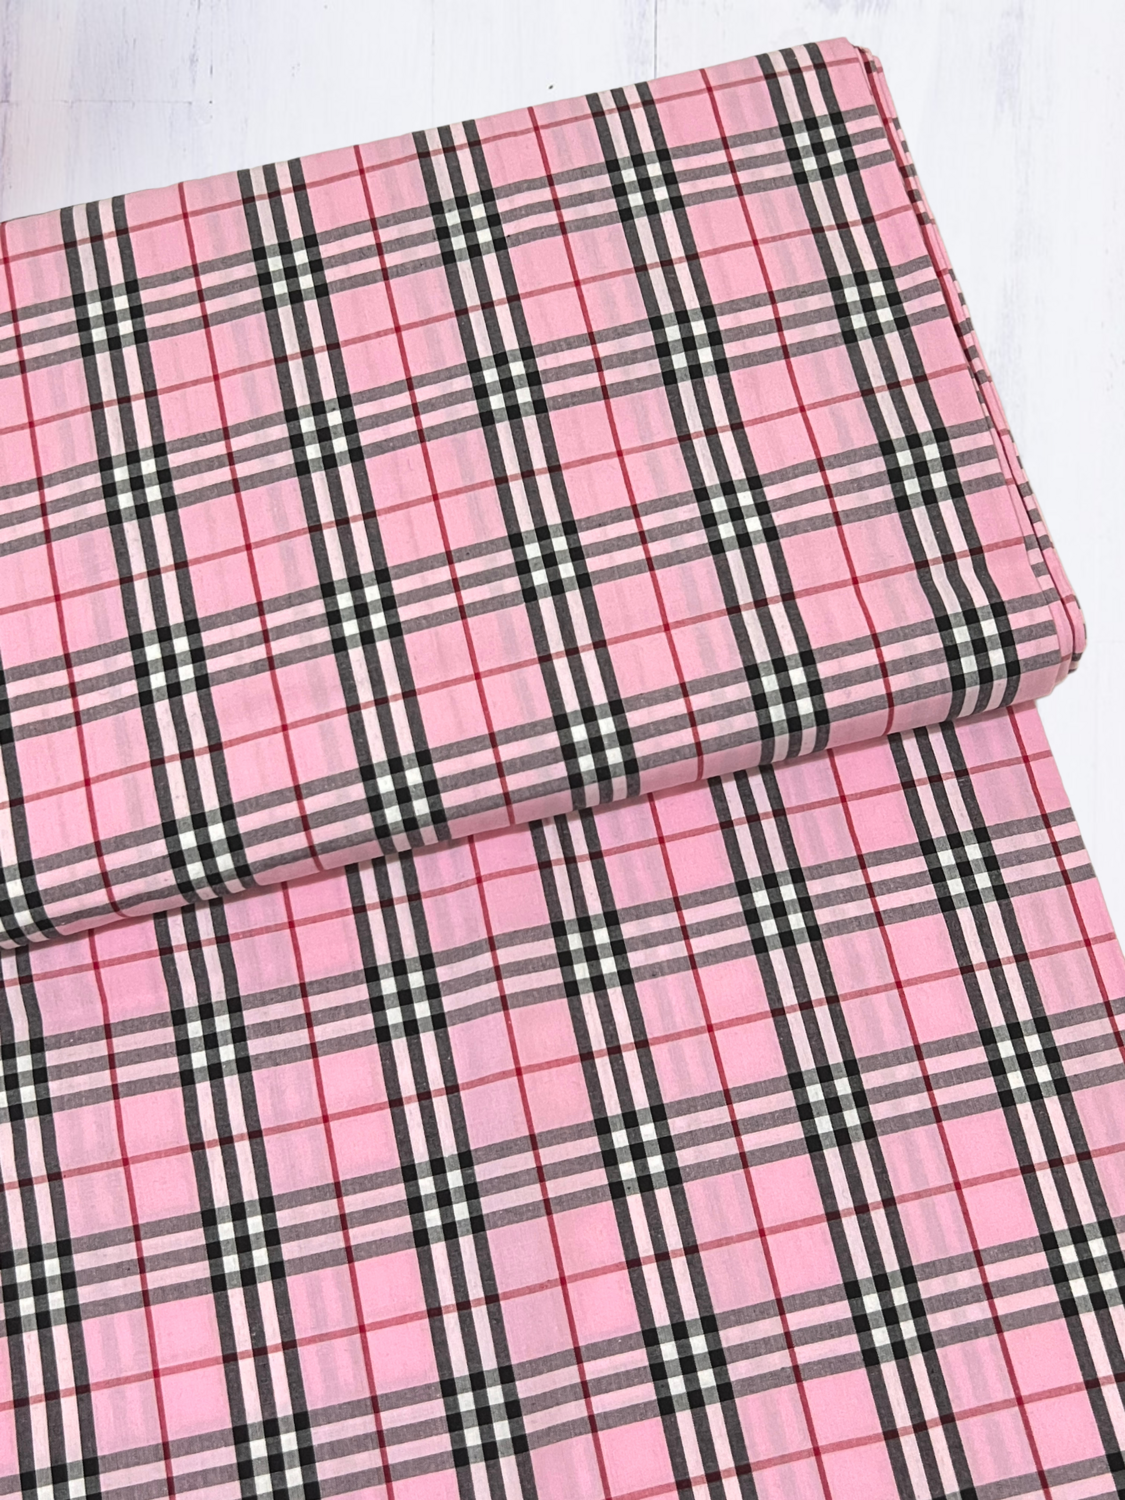 Plaid, Pink | Yarn Dyed Cotton Woven | 150cm Wide